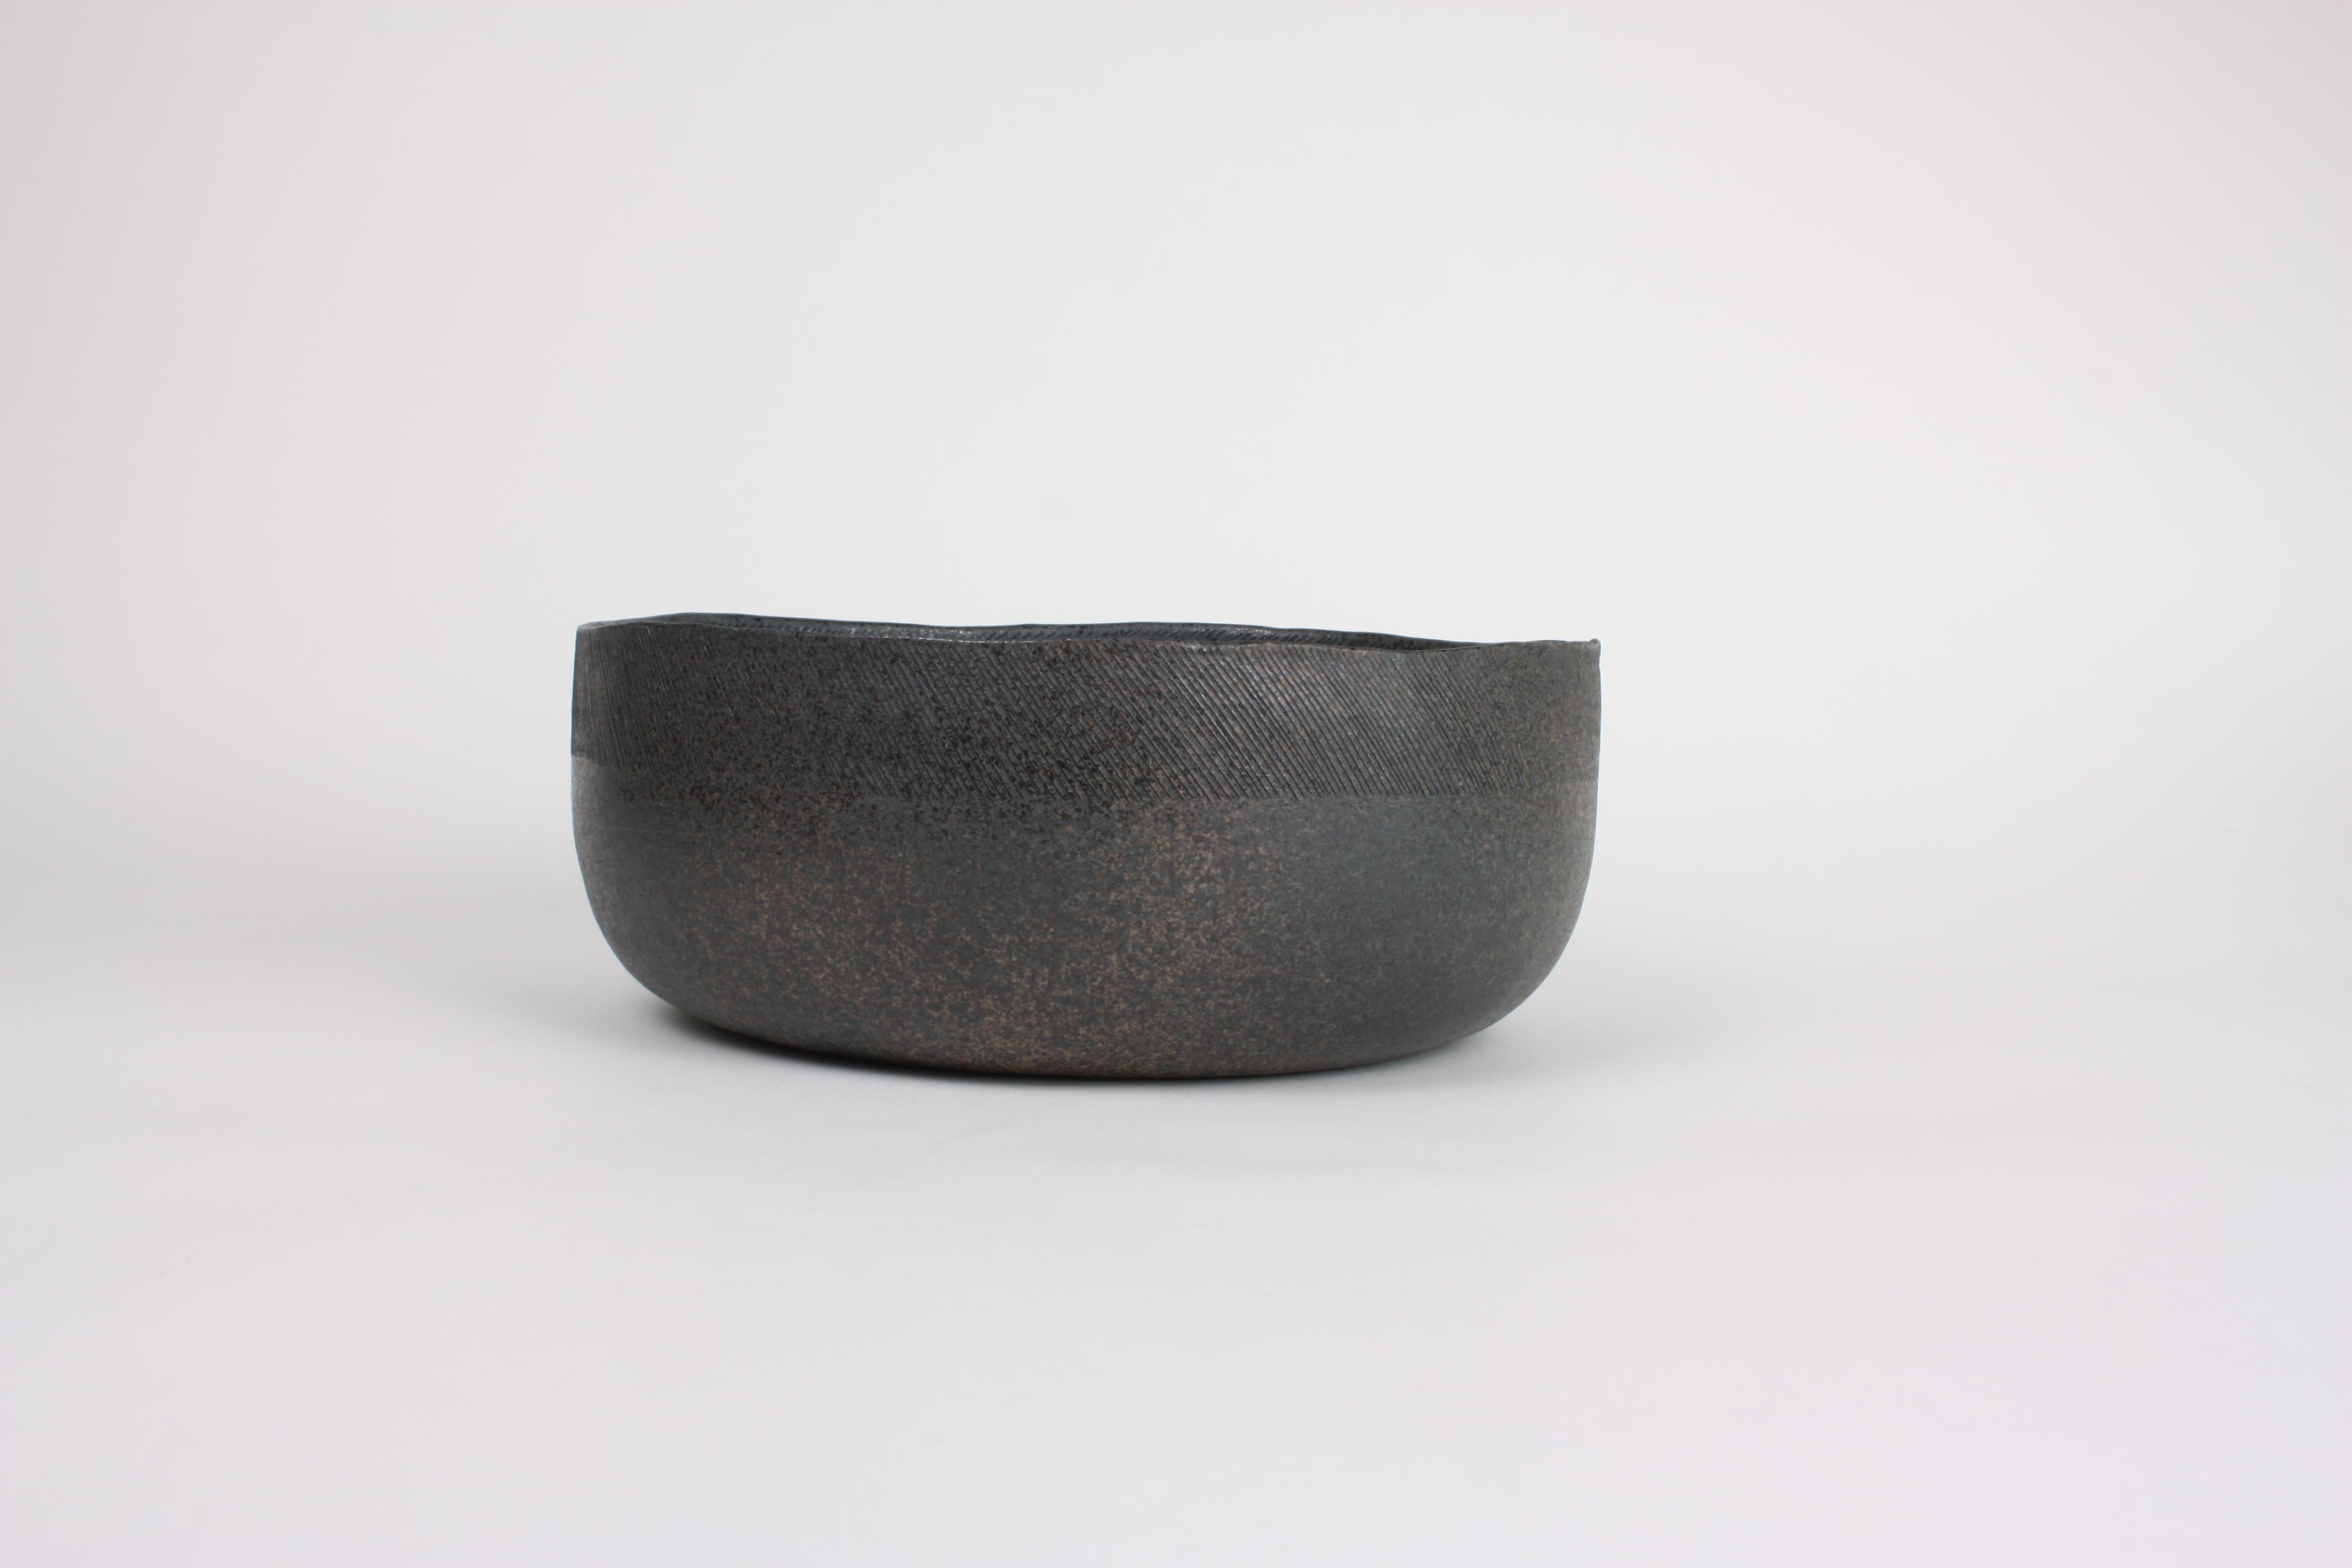 Large decorative contemporary stoneware flat bowl in gray tones. The thinness of this unglazed bowl can only be achieved using the technique of coiling. Built up from the bottom by integrating rolled ropes of clay one at atime, the bowl slowly takes